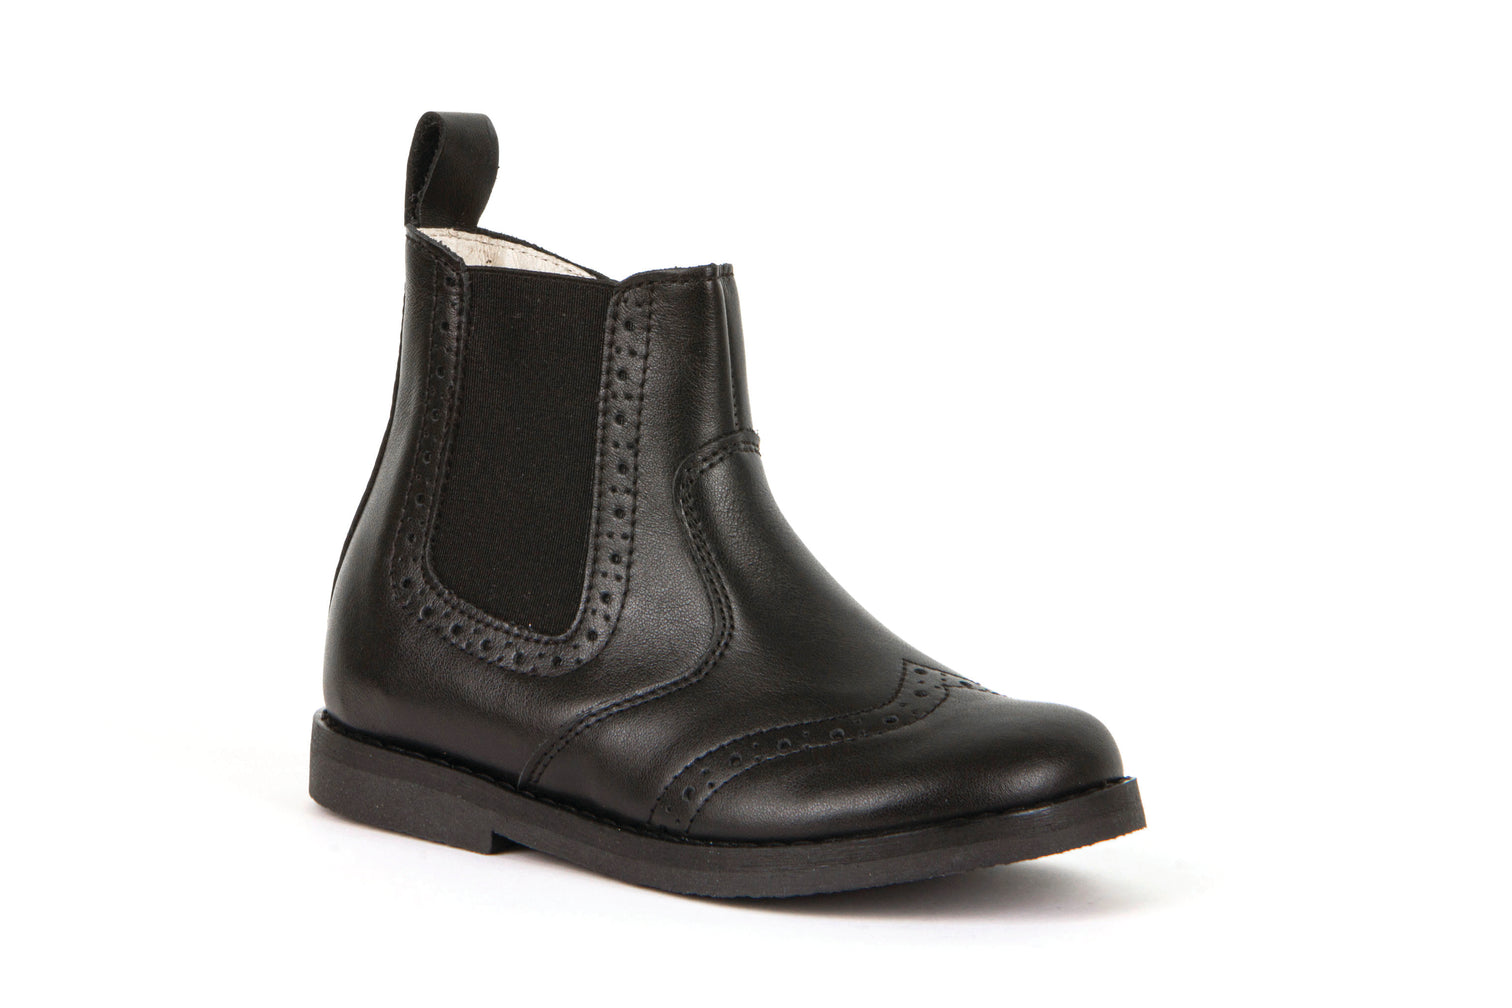 A girls Chelsea boot by Froddo, style G3160061, in black leather with zip fastening.